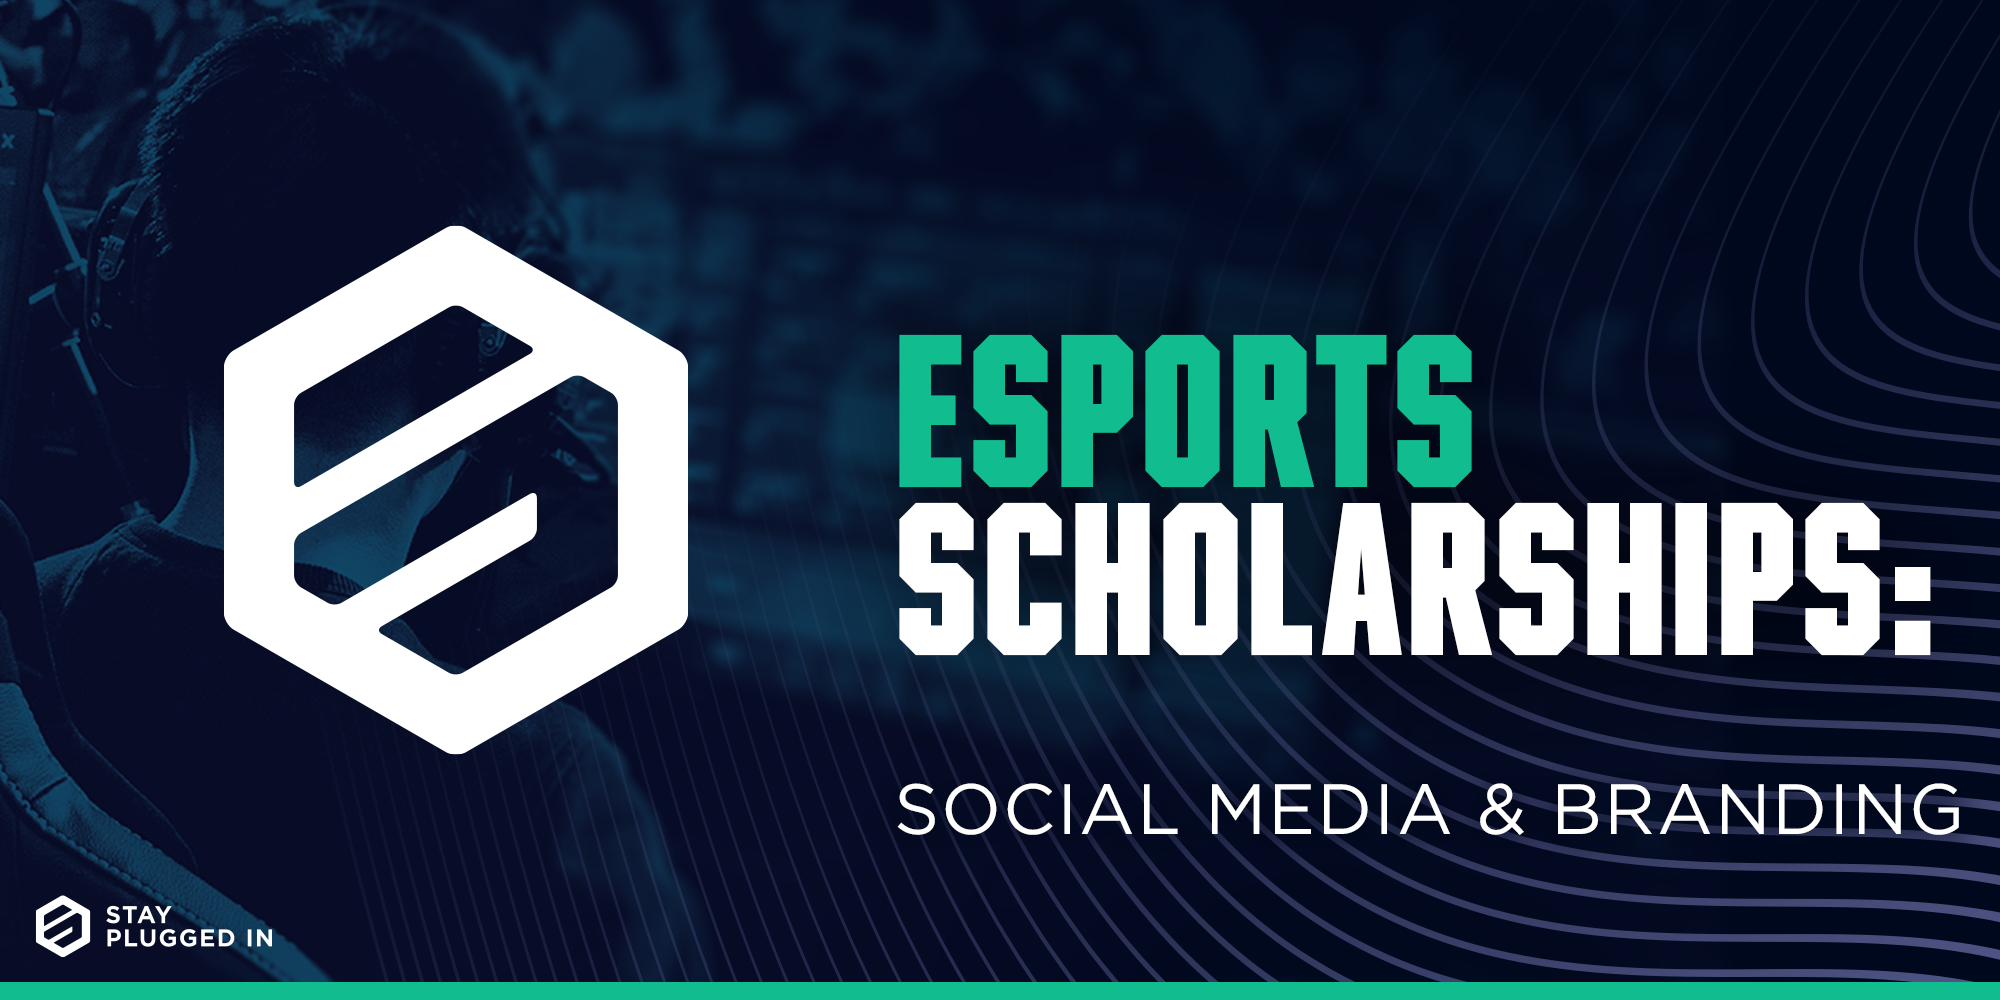 Esports Scholarships: How to set up your social media for success